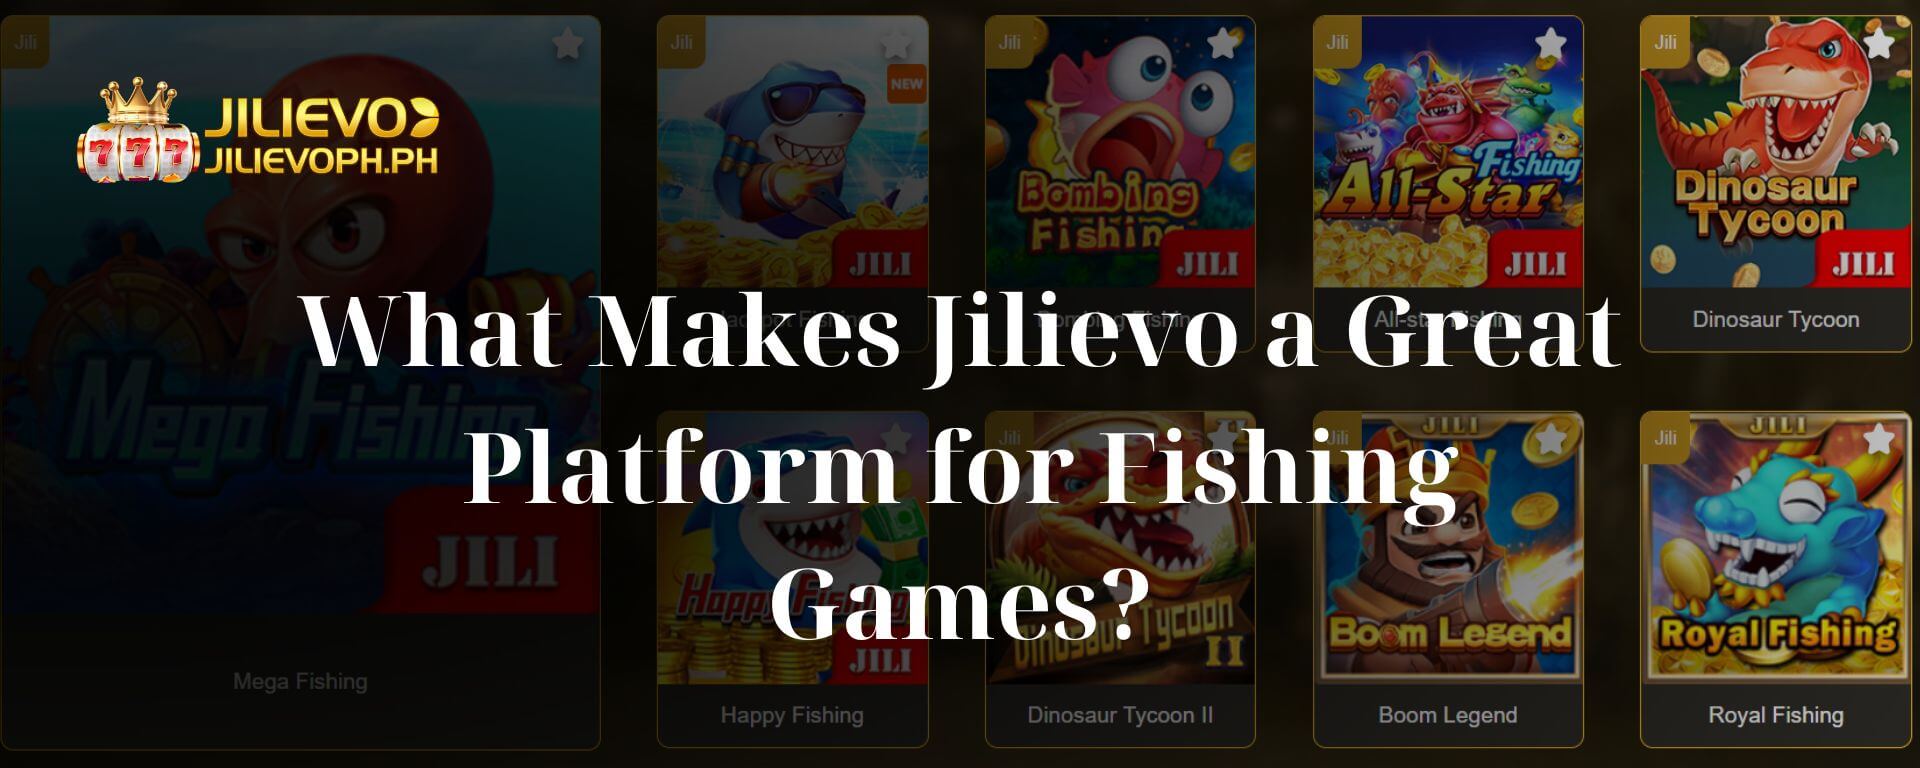 What Makes Jilievo a Great Platform for Fishing Games?